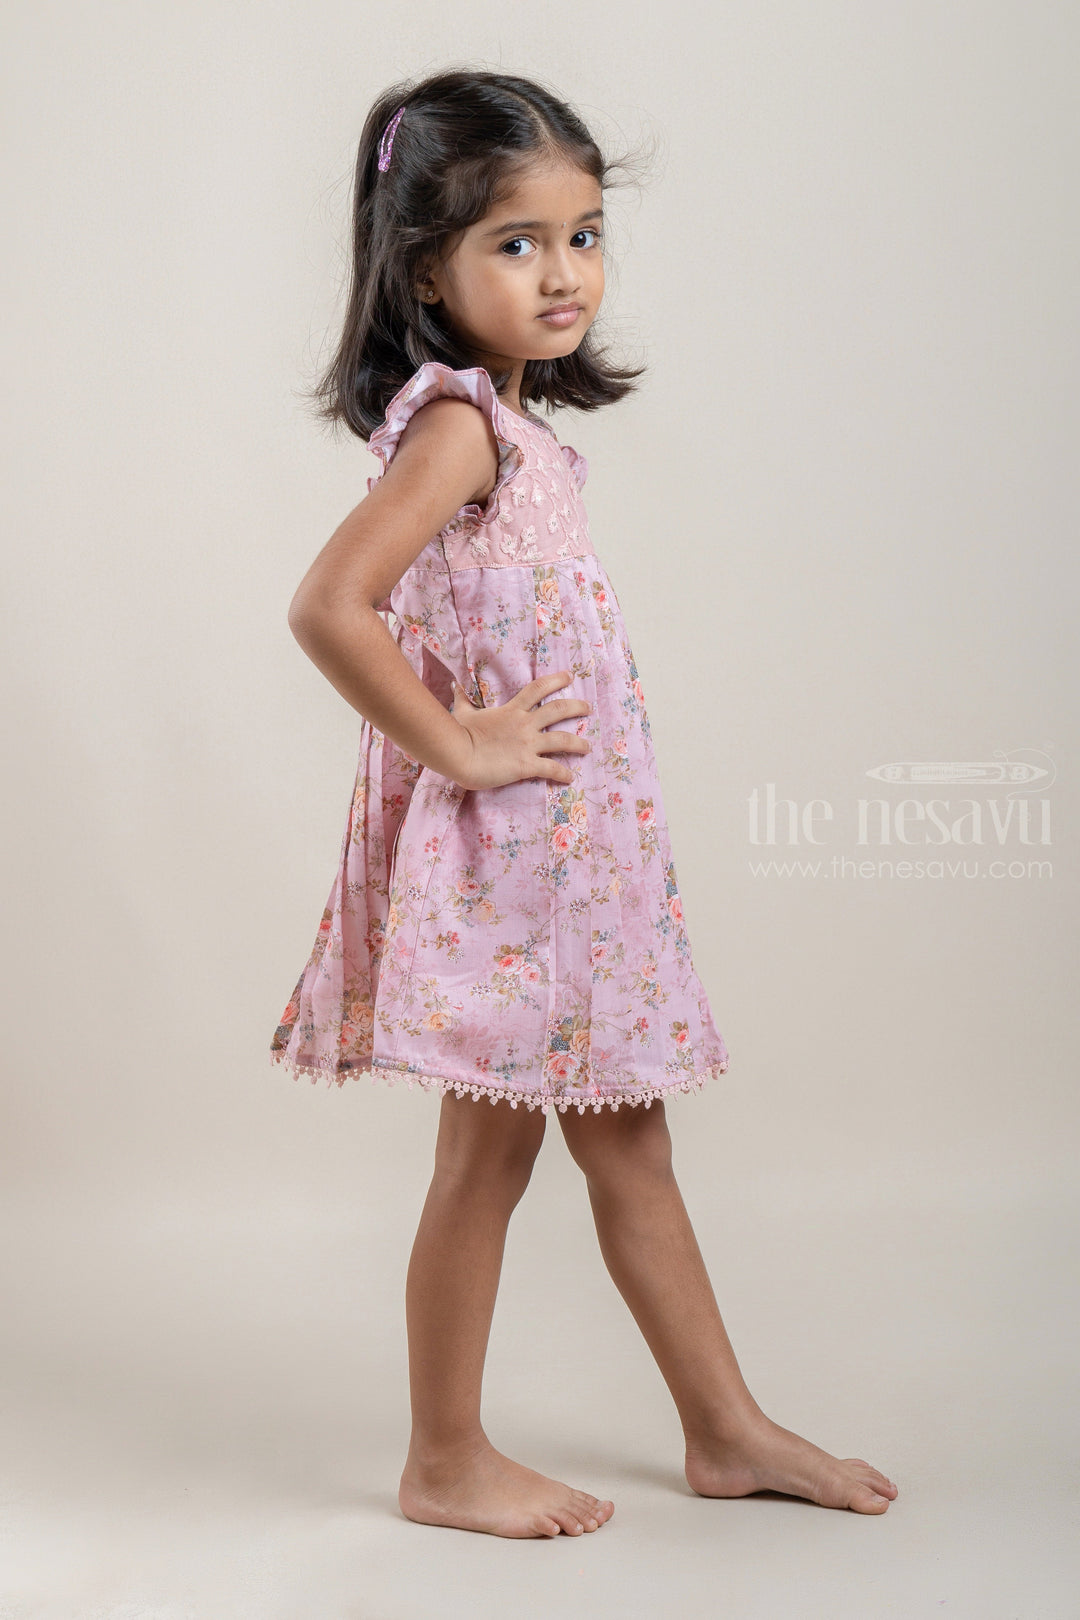 The Nesavu Baby Cotton Frocks Gorgeous Salmon Pink Floral Printed Pleated Cotton Frock For Baby Girls Nesavu Latest Frock Design For Girls | Baby Frock Suit | The Nesavu